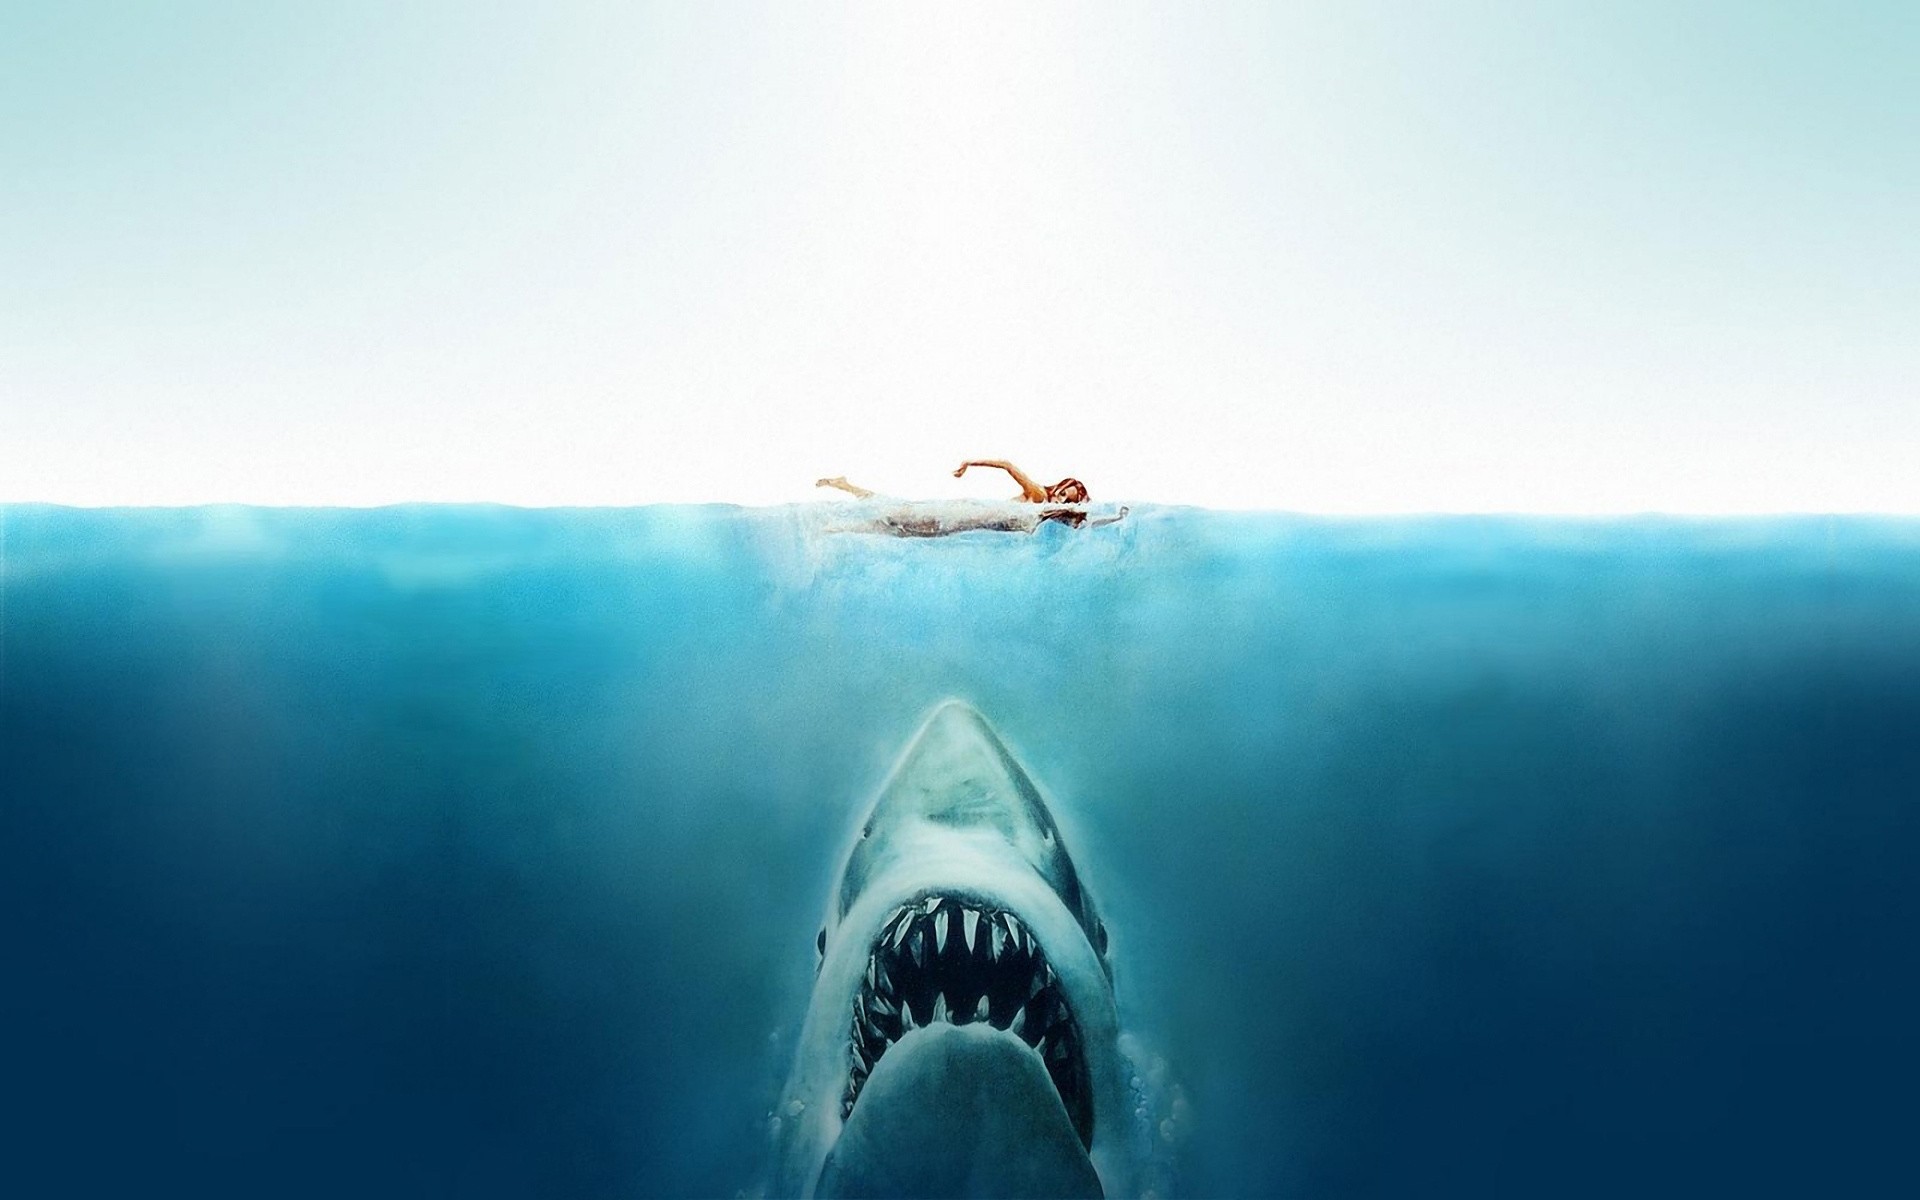 General 1920x1200 Jaws movies shark split view turquoise sea movie poster